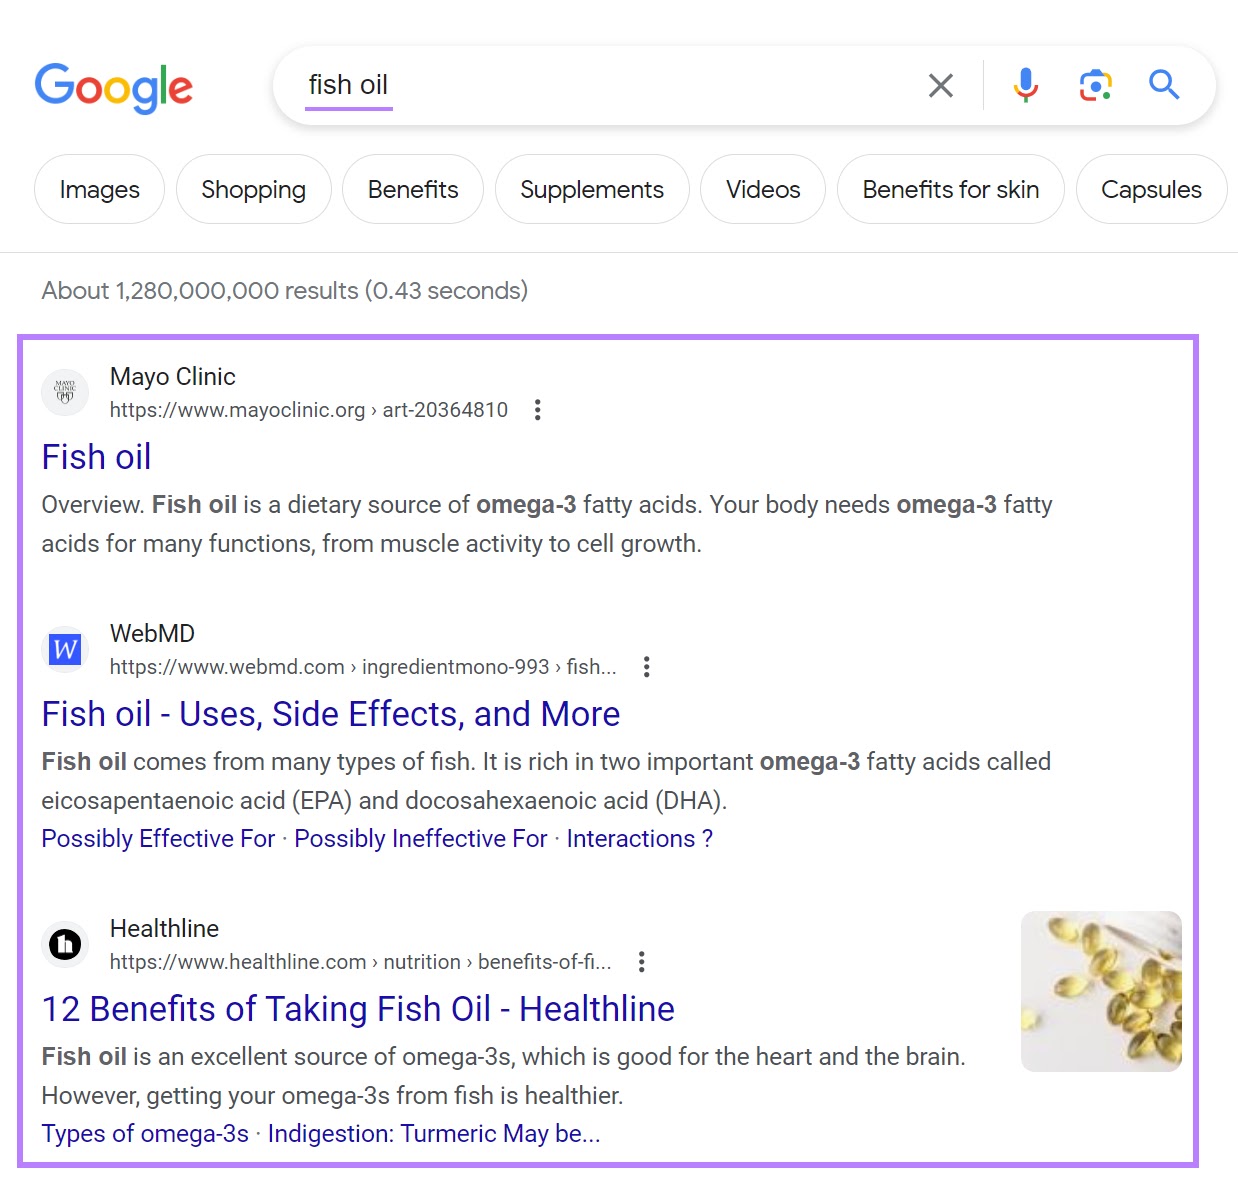 Google's SERP for “fish oil" query